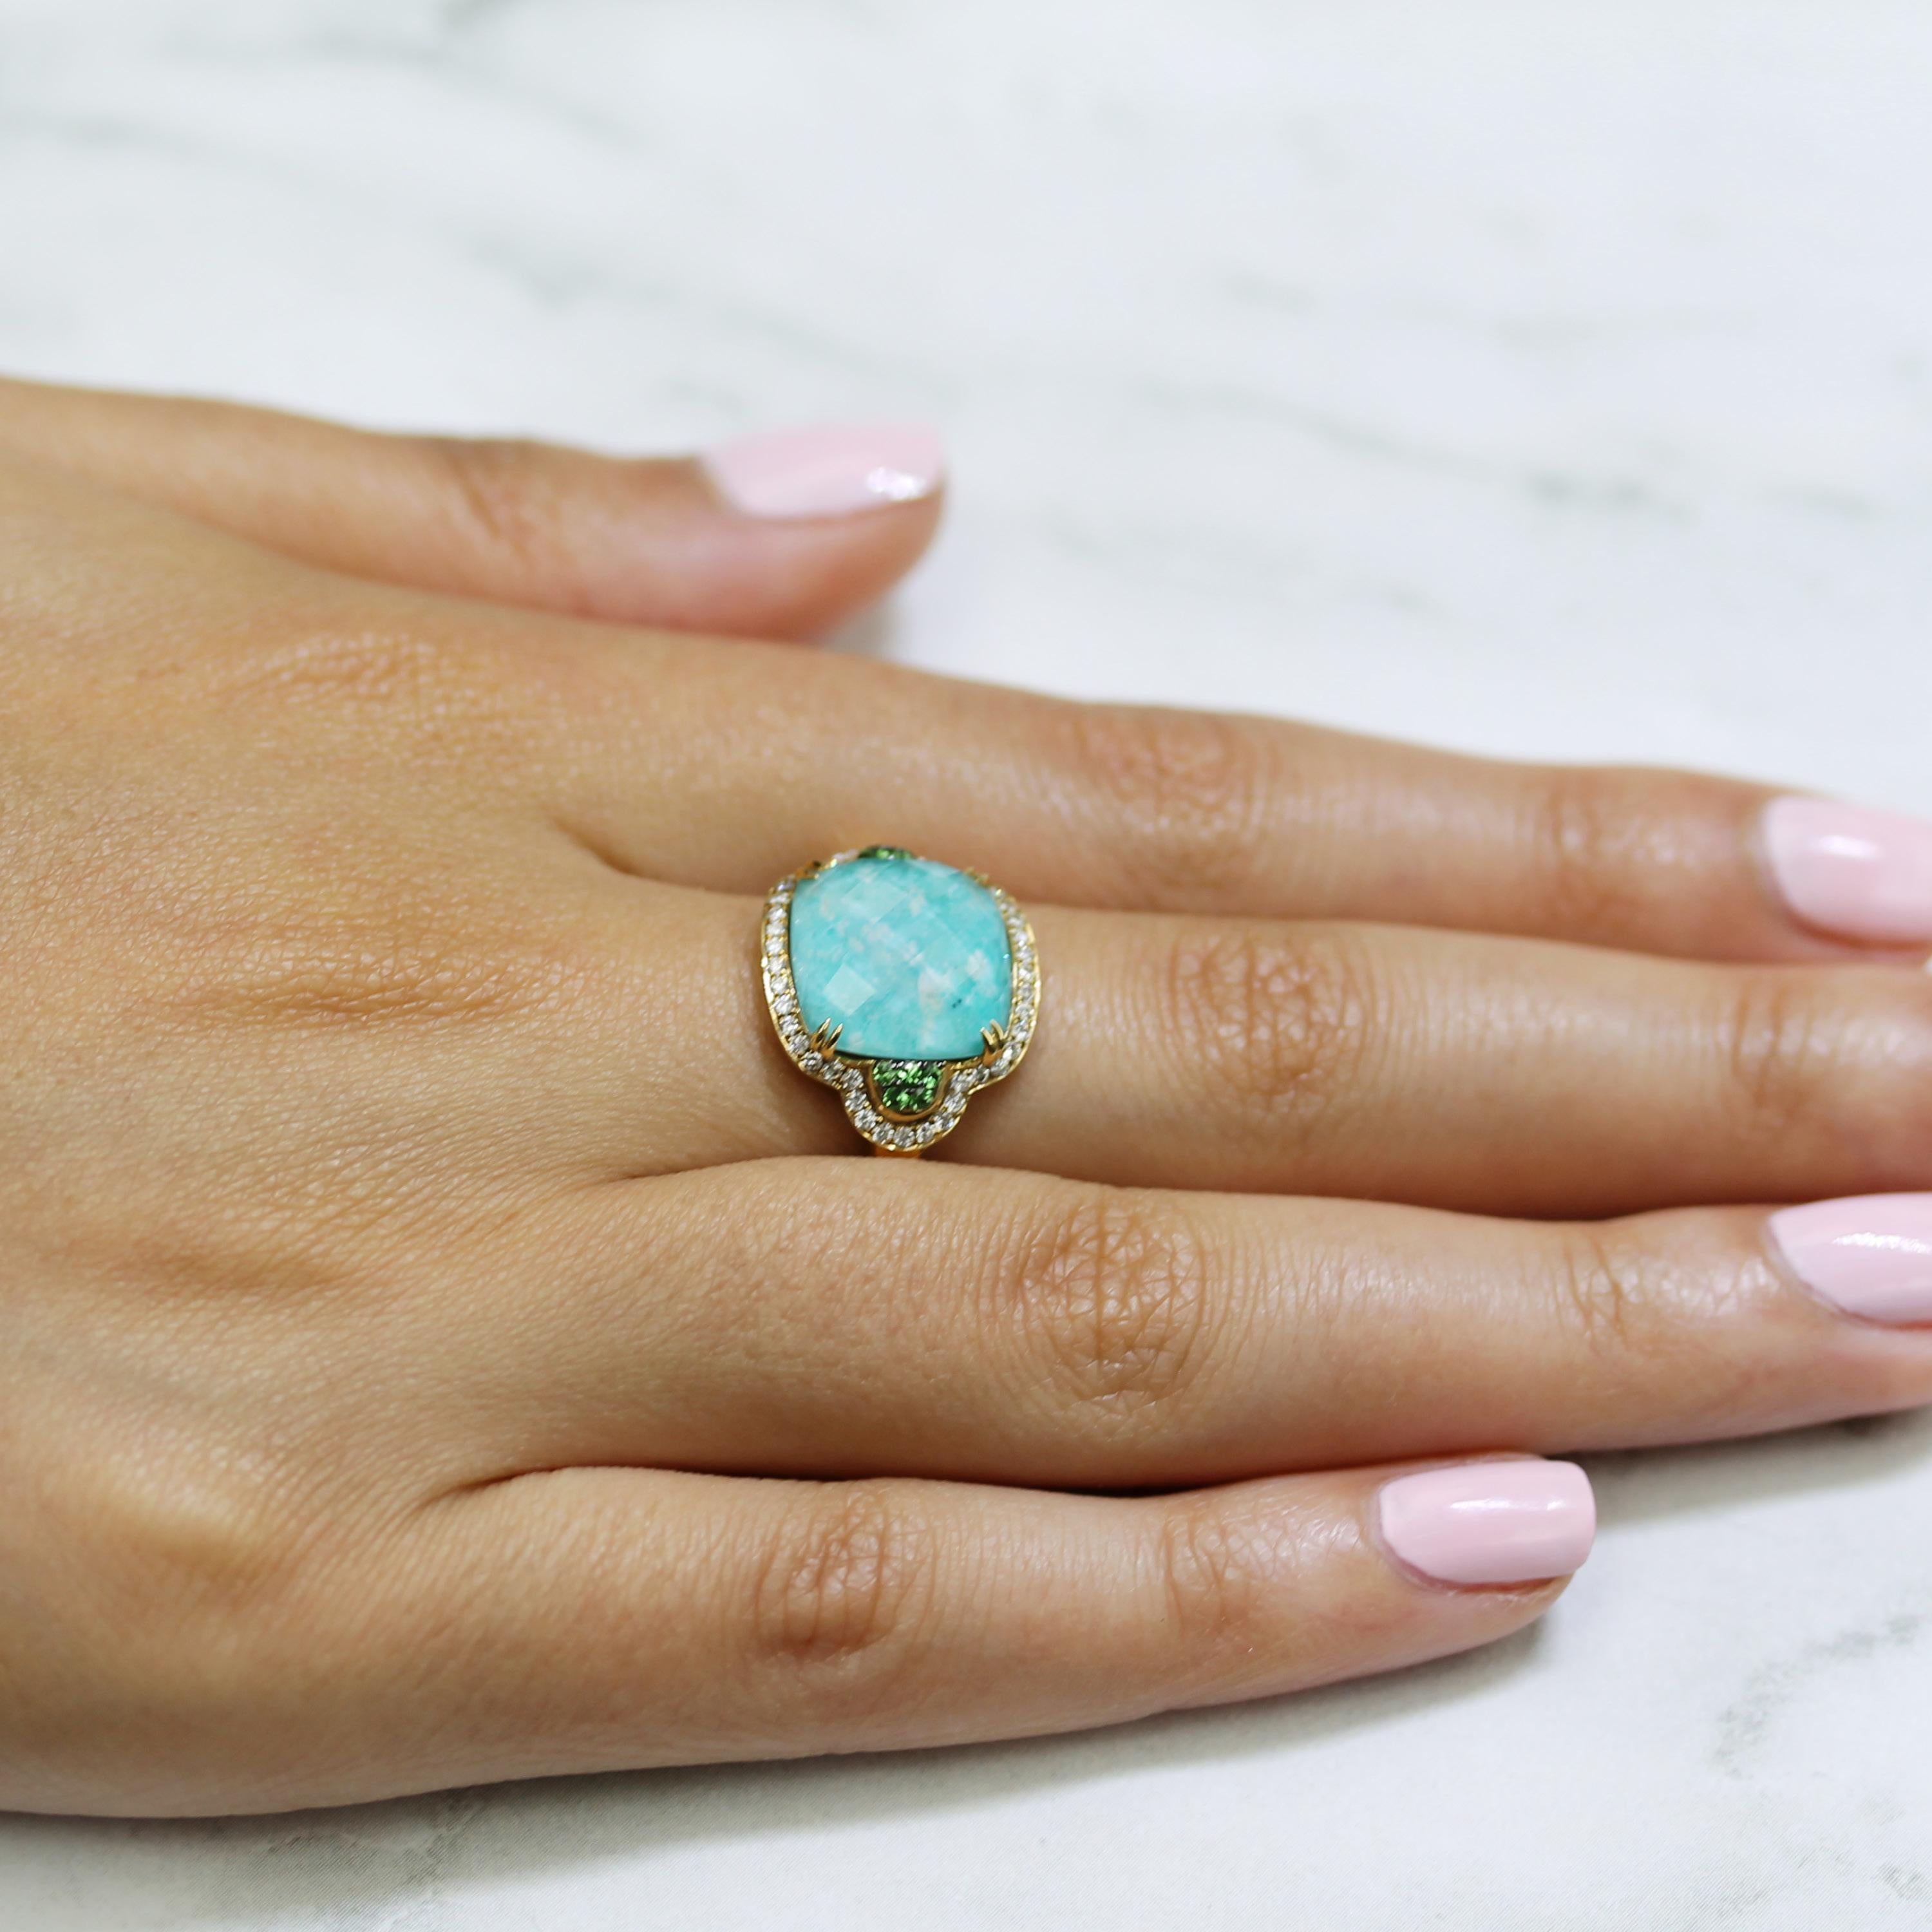 18K Yellow Gold Ring featuring a doublet of Cushion-Cut White Quartz layered with Amazonite, Diamond Halo, and Green Tsavorite accents. Finger size 6.5, adjustable upon request/quote. Amazonite, known as 